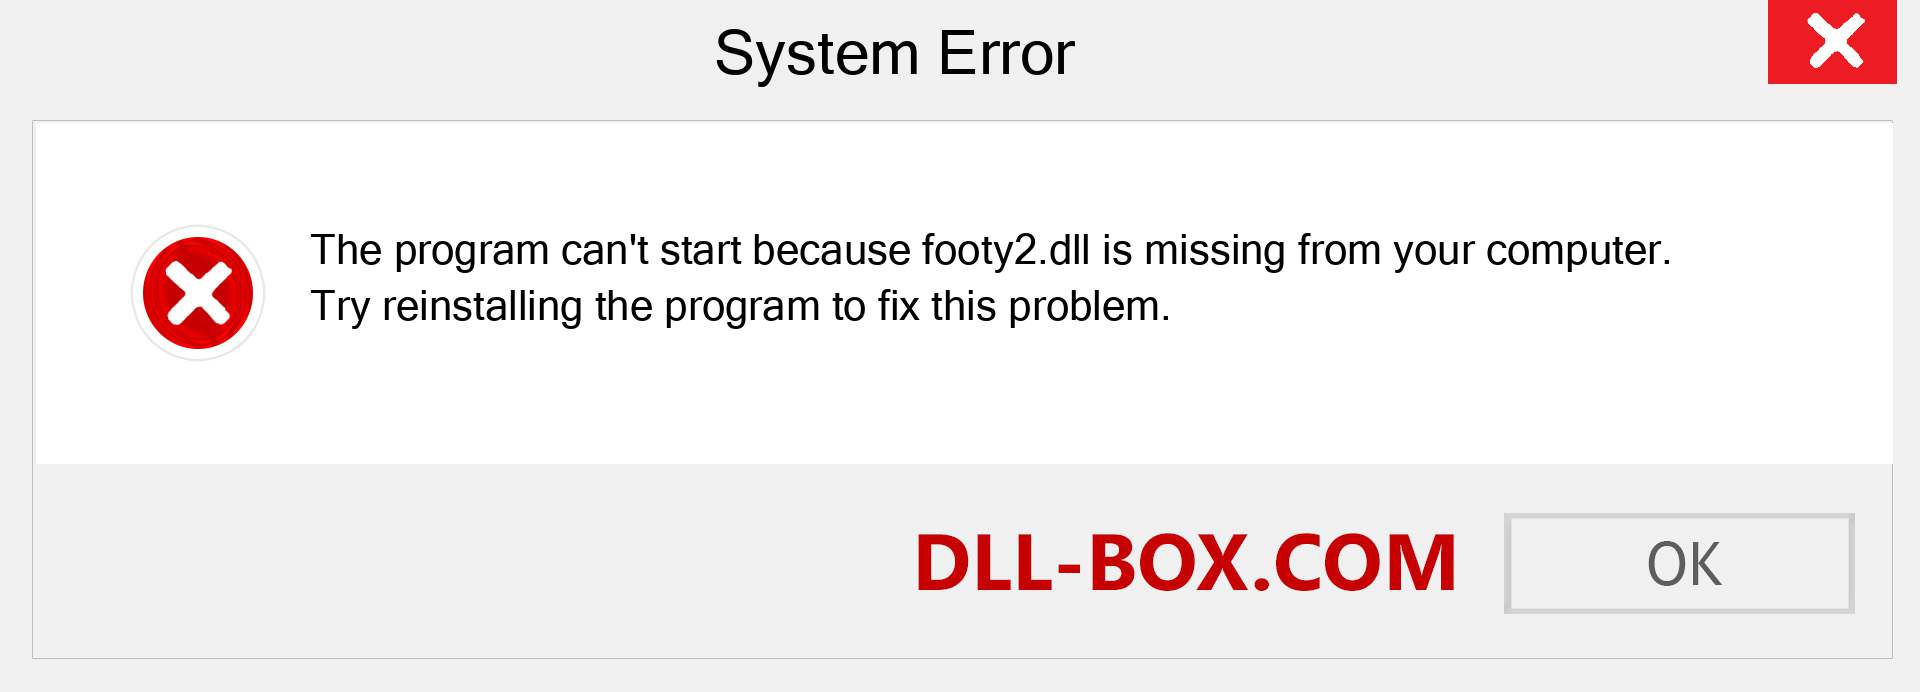  footy2.dll file is missing?. Download for Windows 7, 8, 10 - Fix  footy2 dll Missing Error on Windows, photos, images